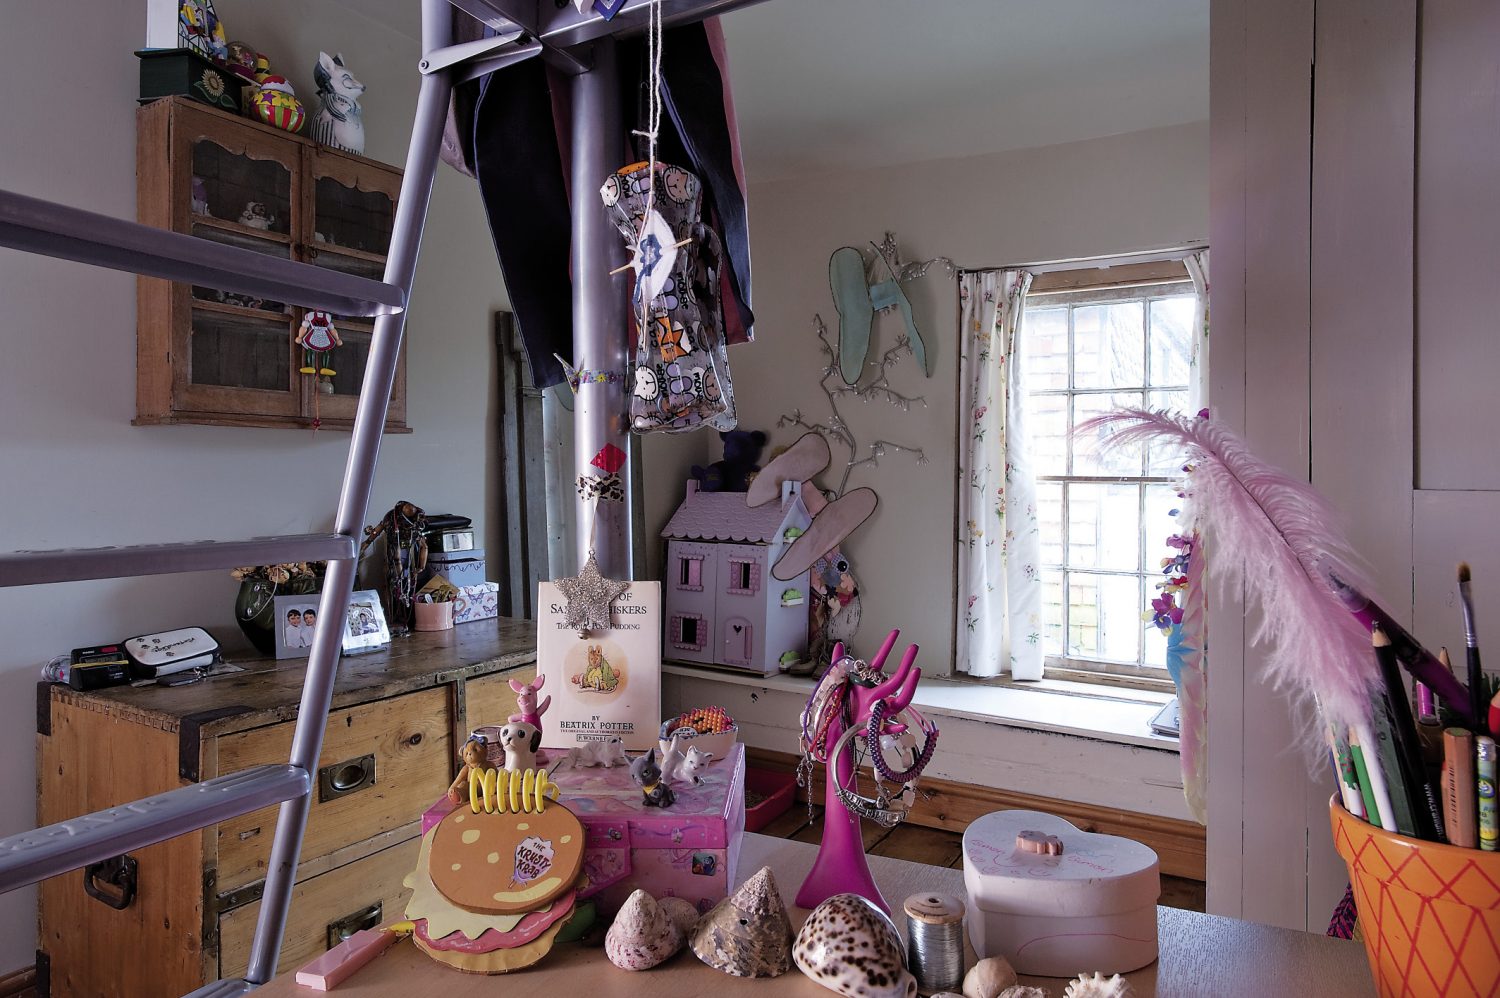 Brad and Jackie’s daughters share a room that is full of new and vintage toys. A dolls’ house stands by the window that is framed by curtains made from a Georgian style spriggy floral print. The girls’ desk already shows signs of an enthusiasm for collecting things too, with shells and found objects carefully arranged in groups